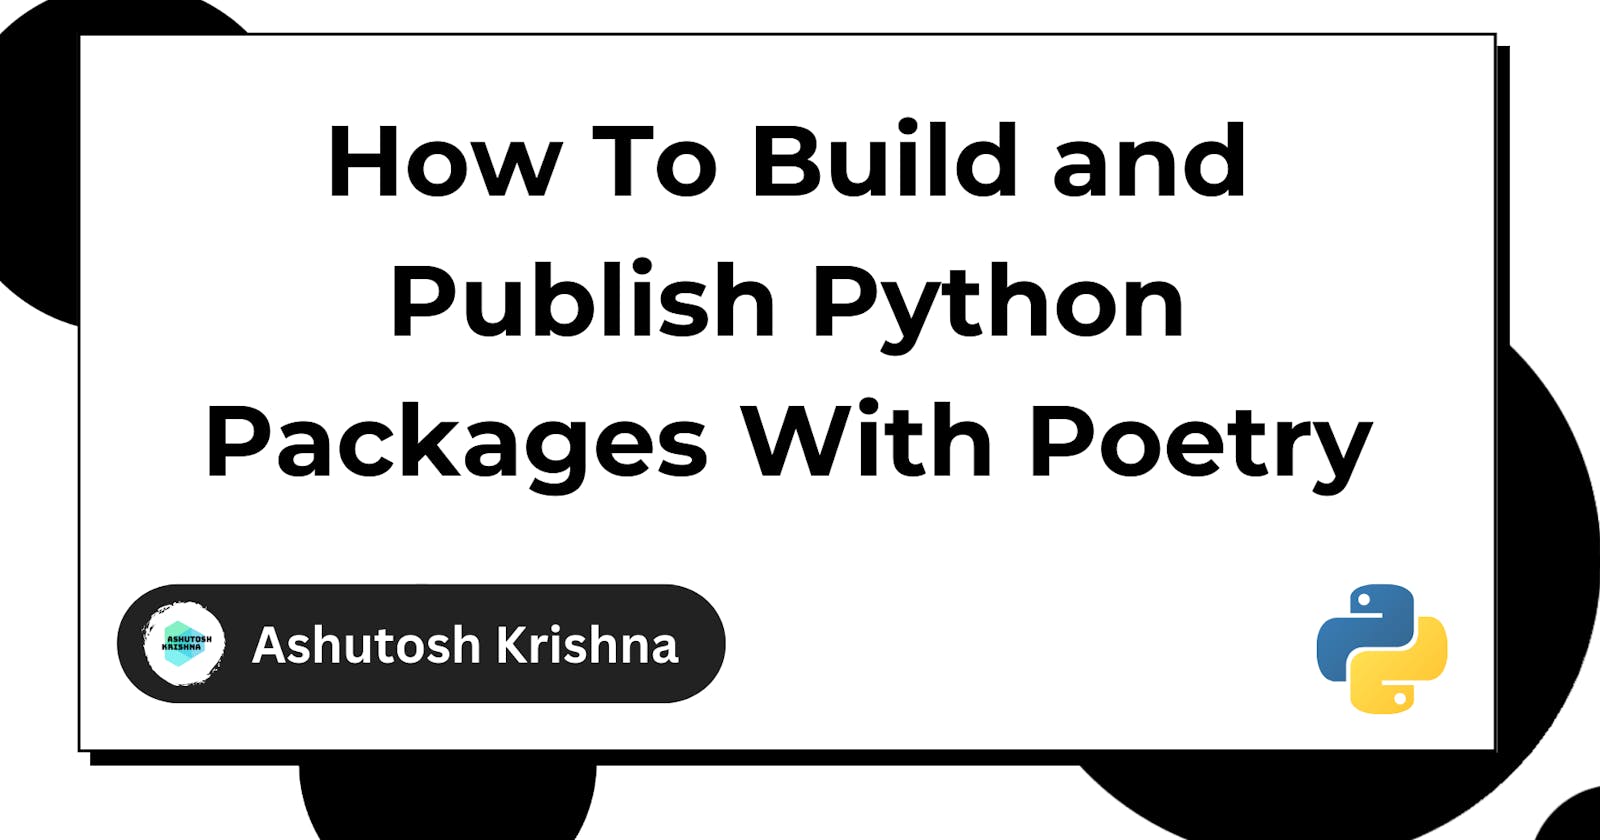 How to Build and Publish Python Packages With Poetry